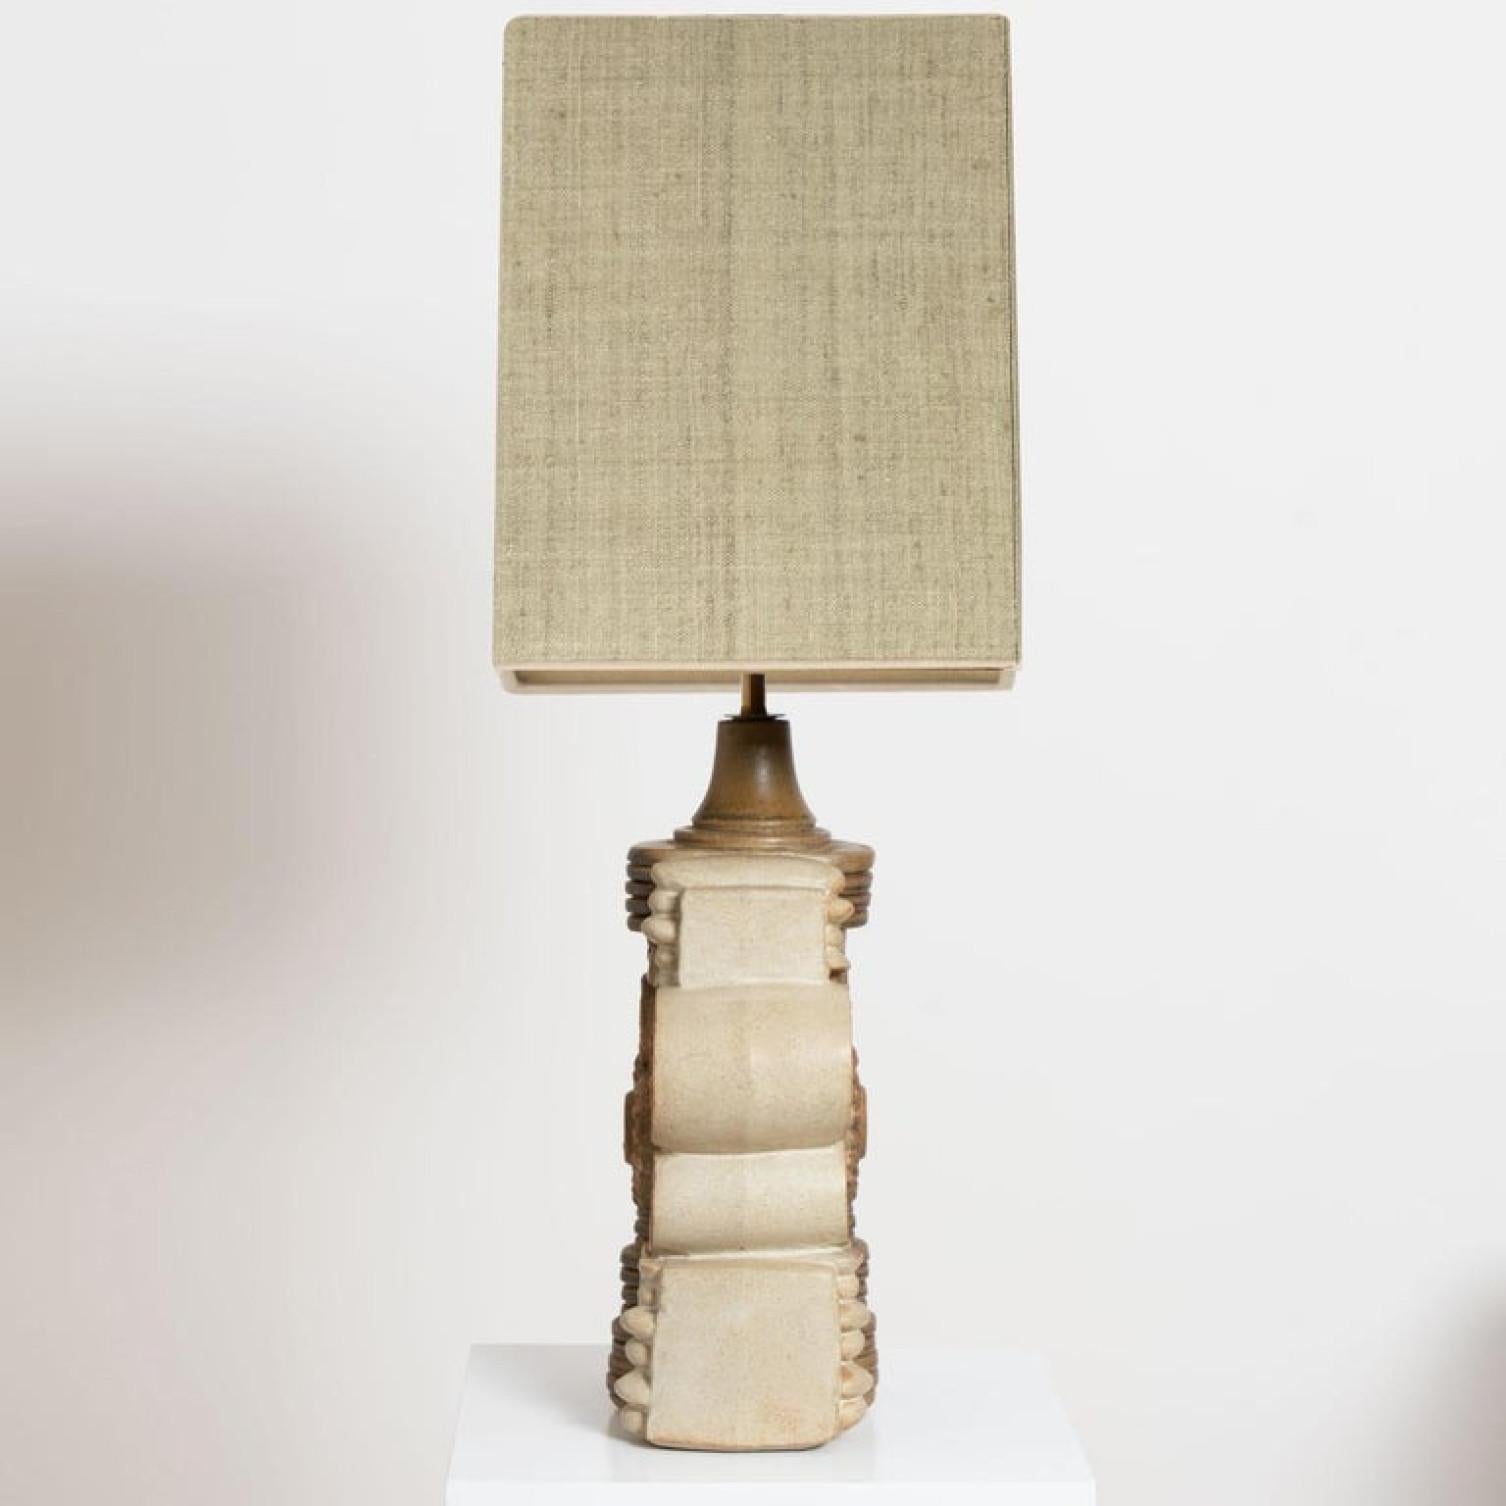 B. Rooke Ceramic Table Lamp with Custom Made Silk Lampshade René Houben, 1960s For Sale 4